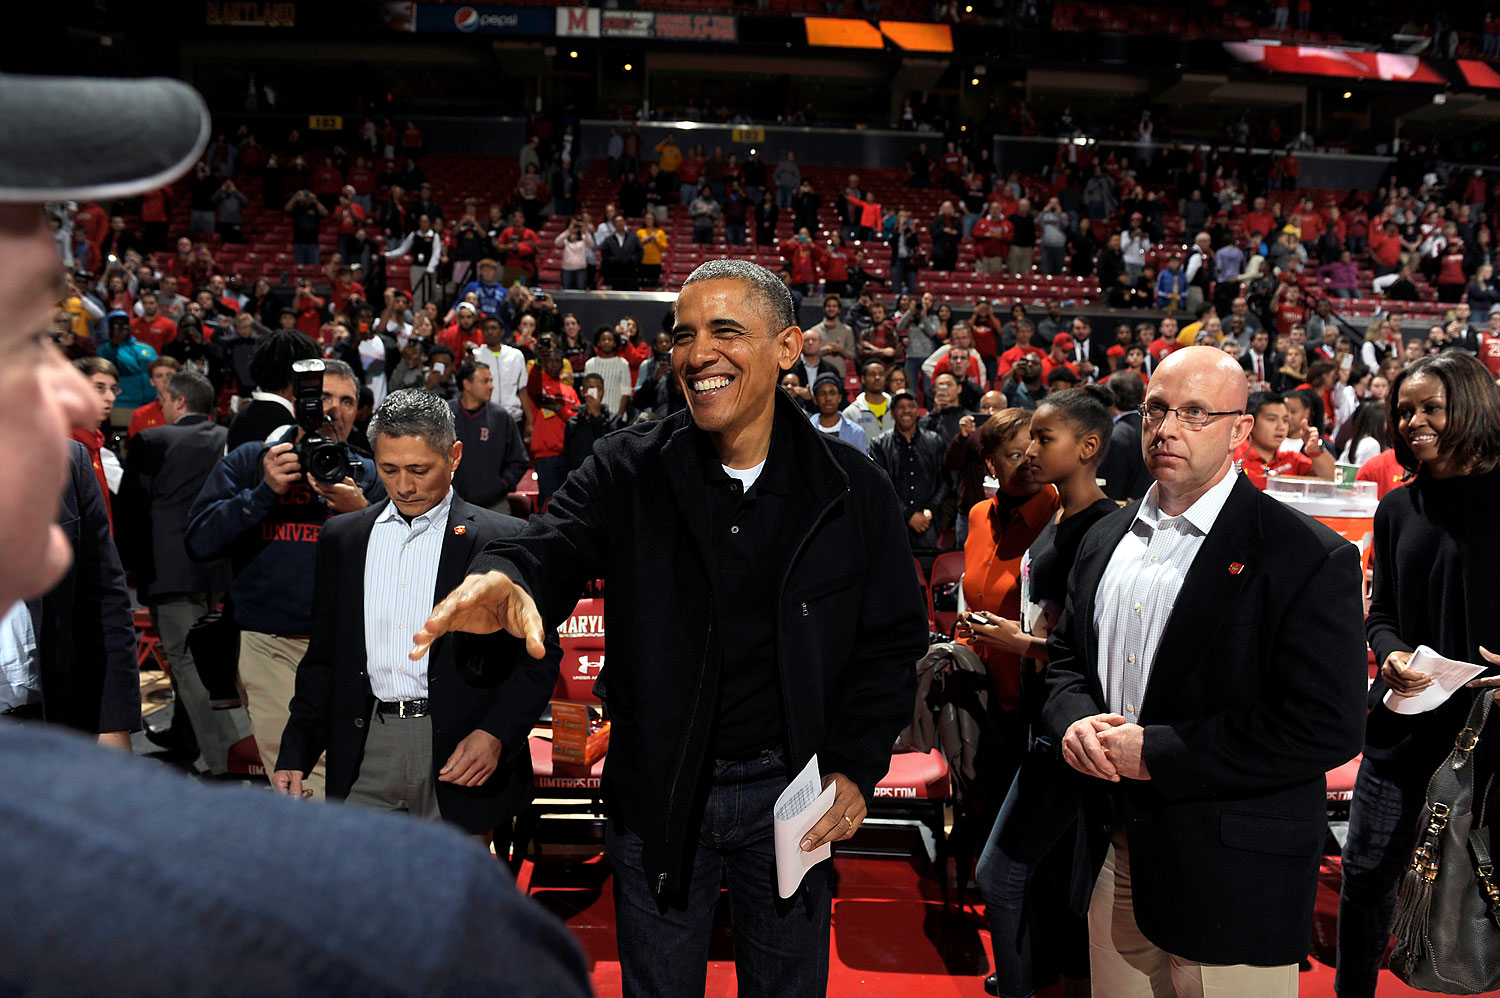 President Obama at a college basketball game between the Oregon State Beavers and the Maryland Terrapins at the Comcast Center on Nov. 17, 2013 in College Park, Maryland.